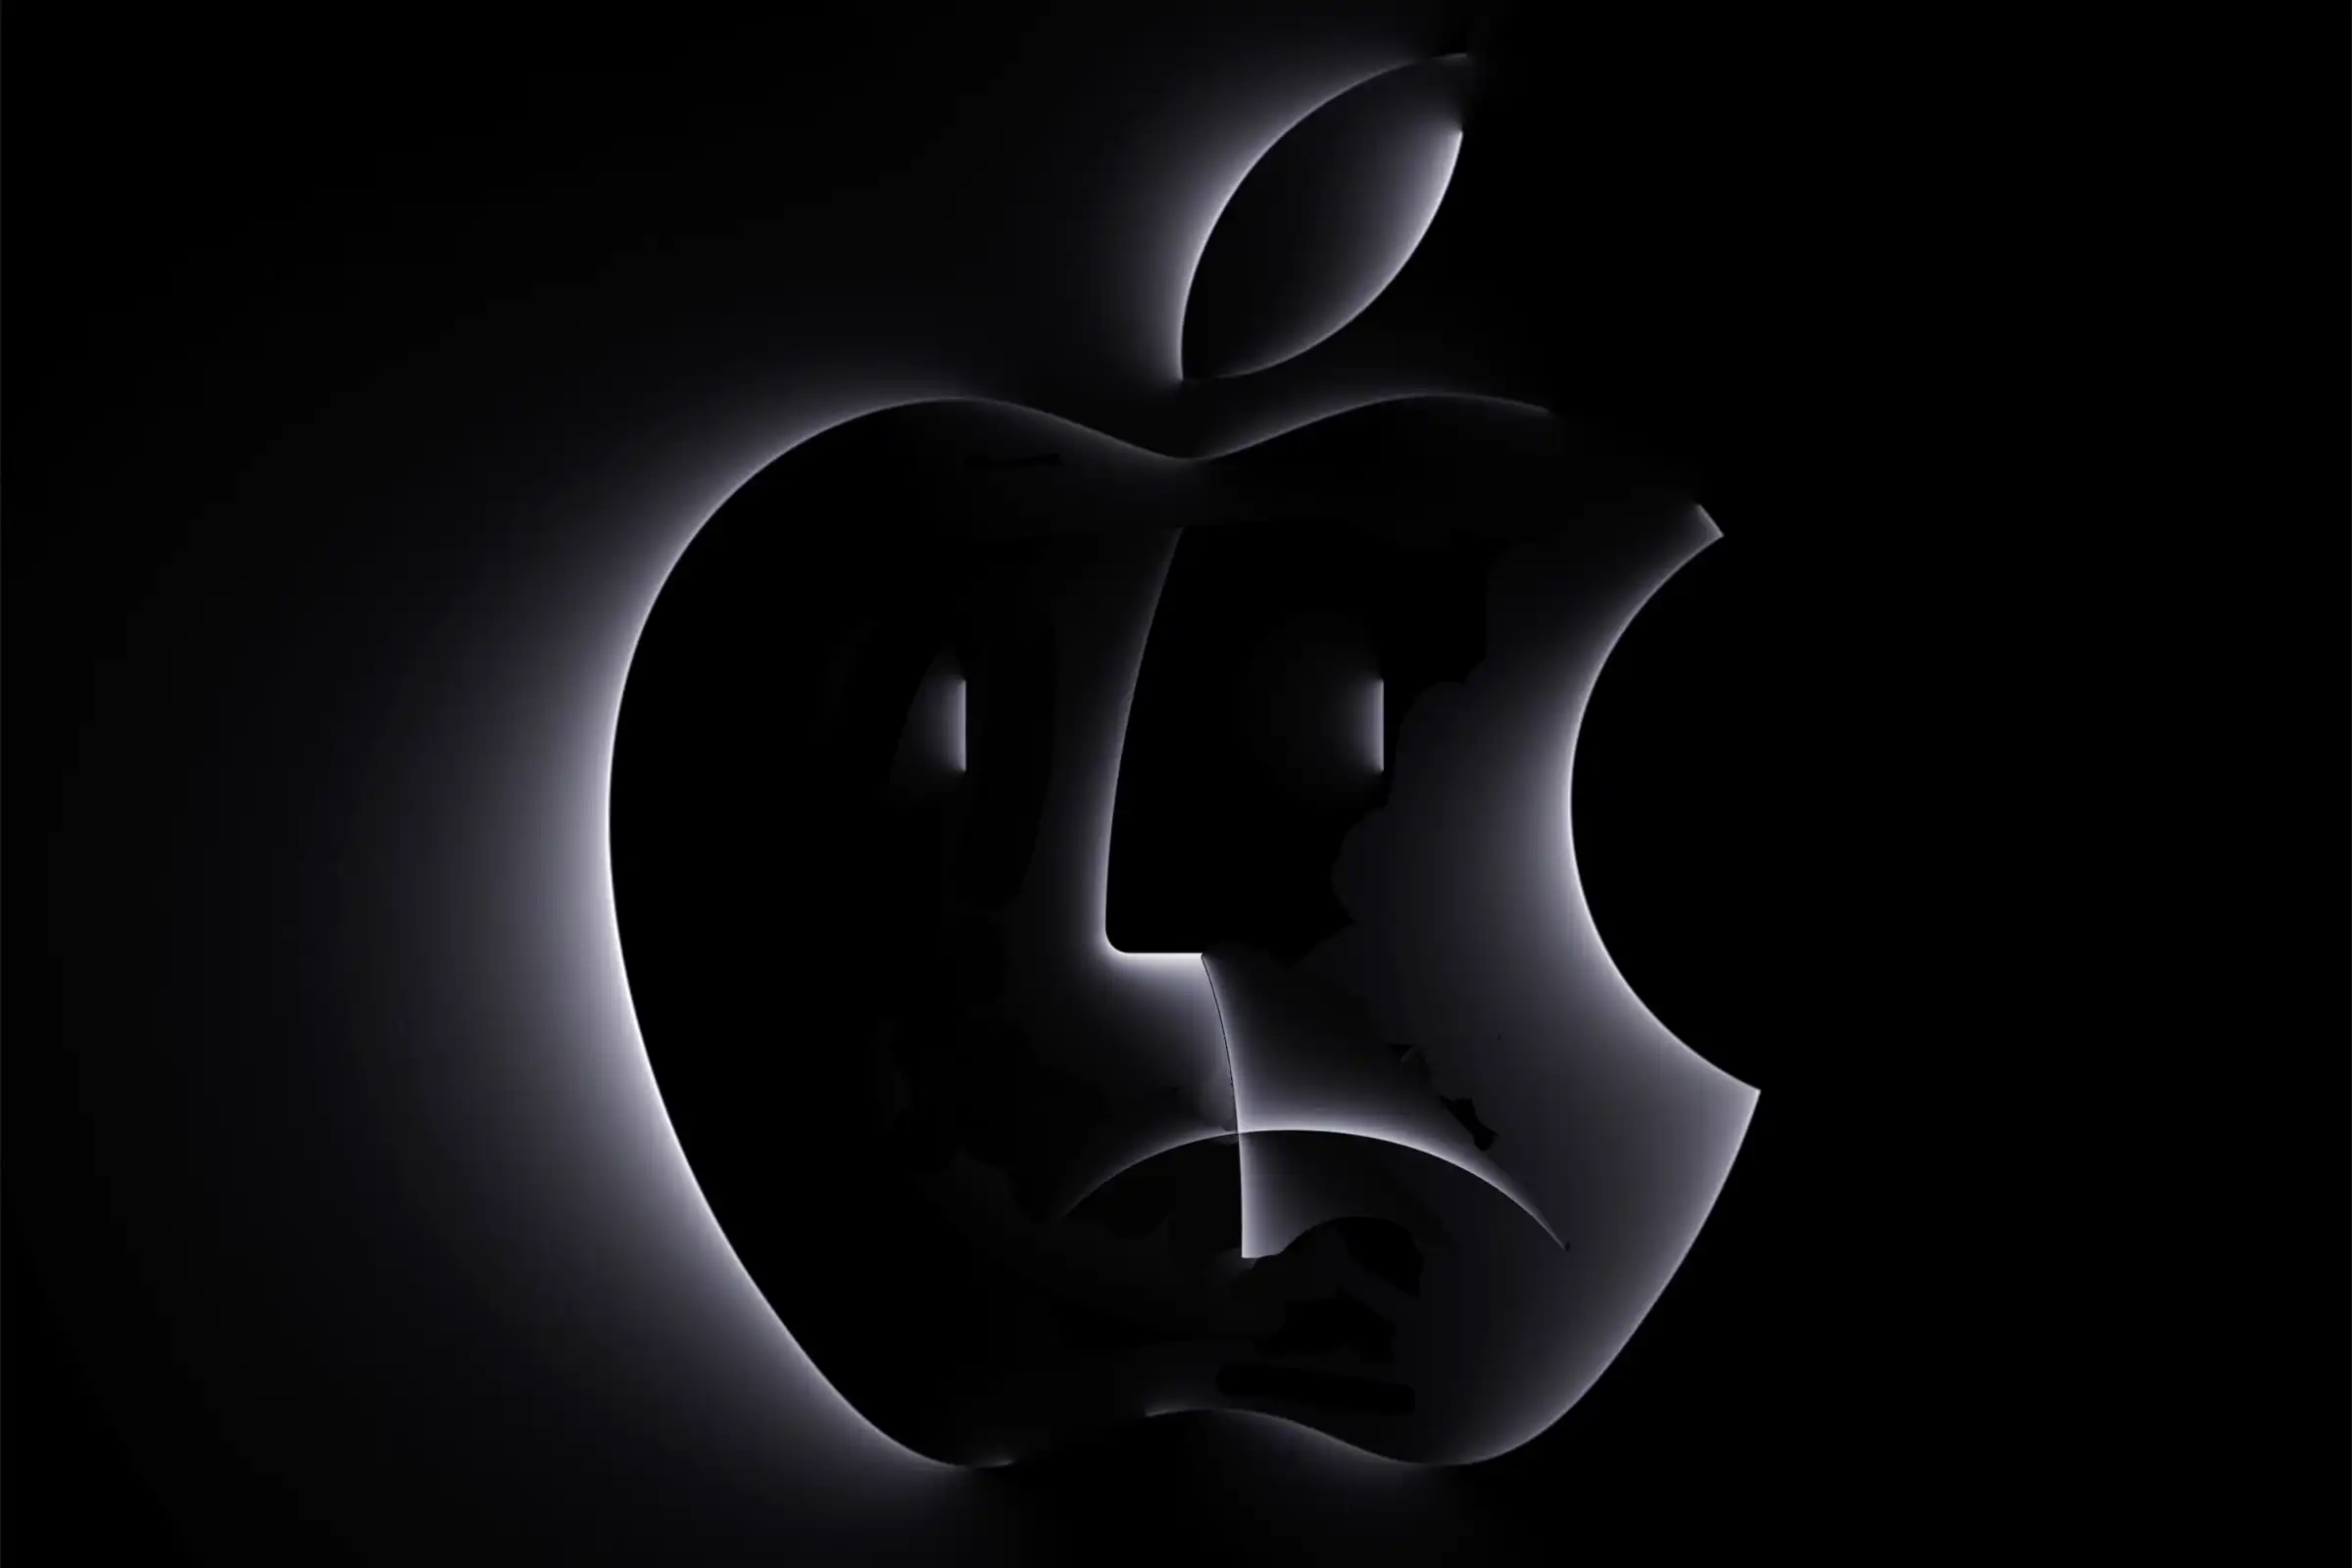 Apple "Scary Fast" Event: What to Expect